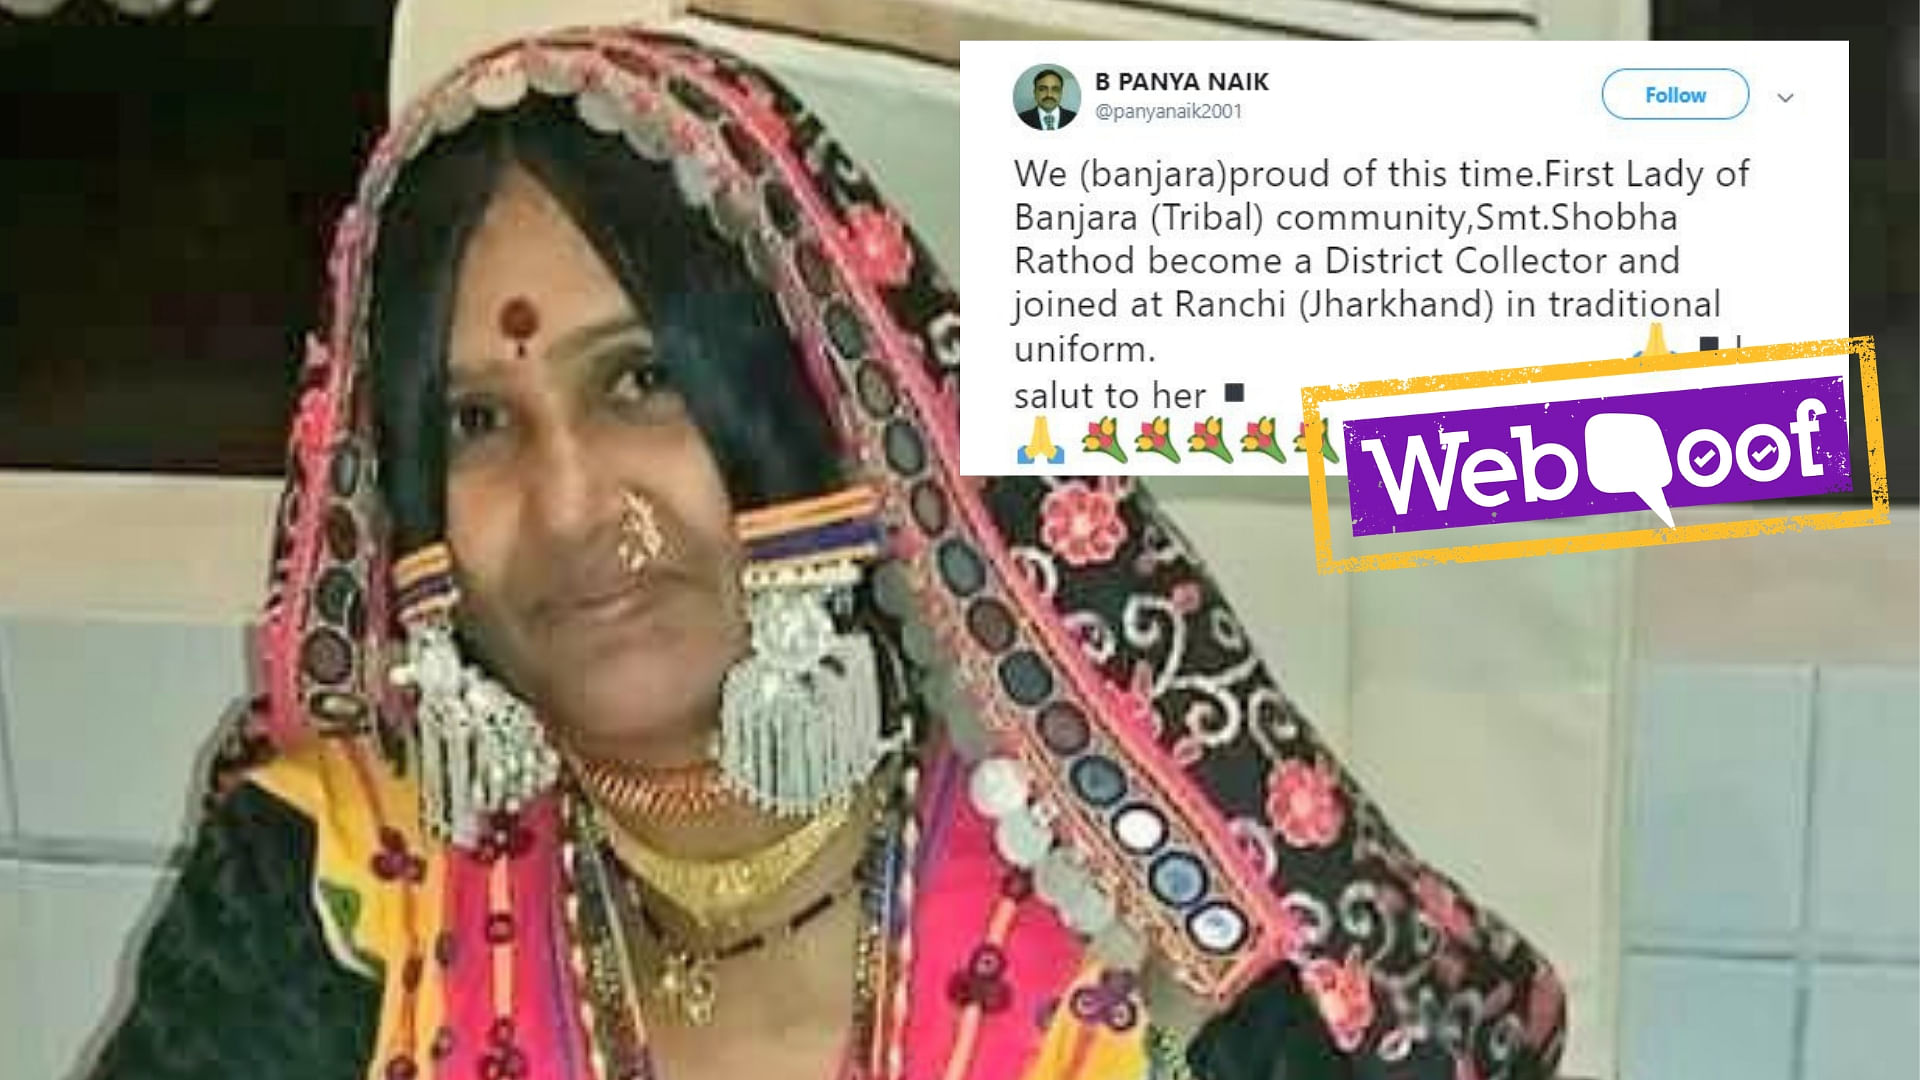 A photo of social worker from Banjara community was falsely shared as the new district collector of Ranchi.